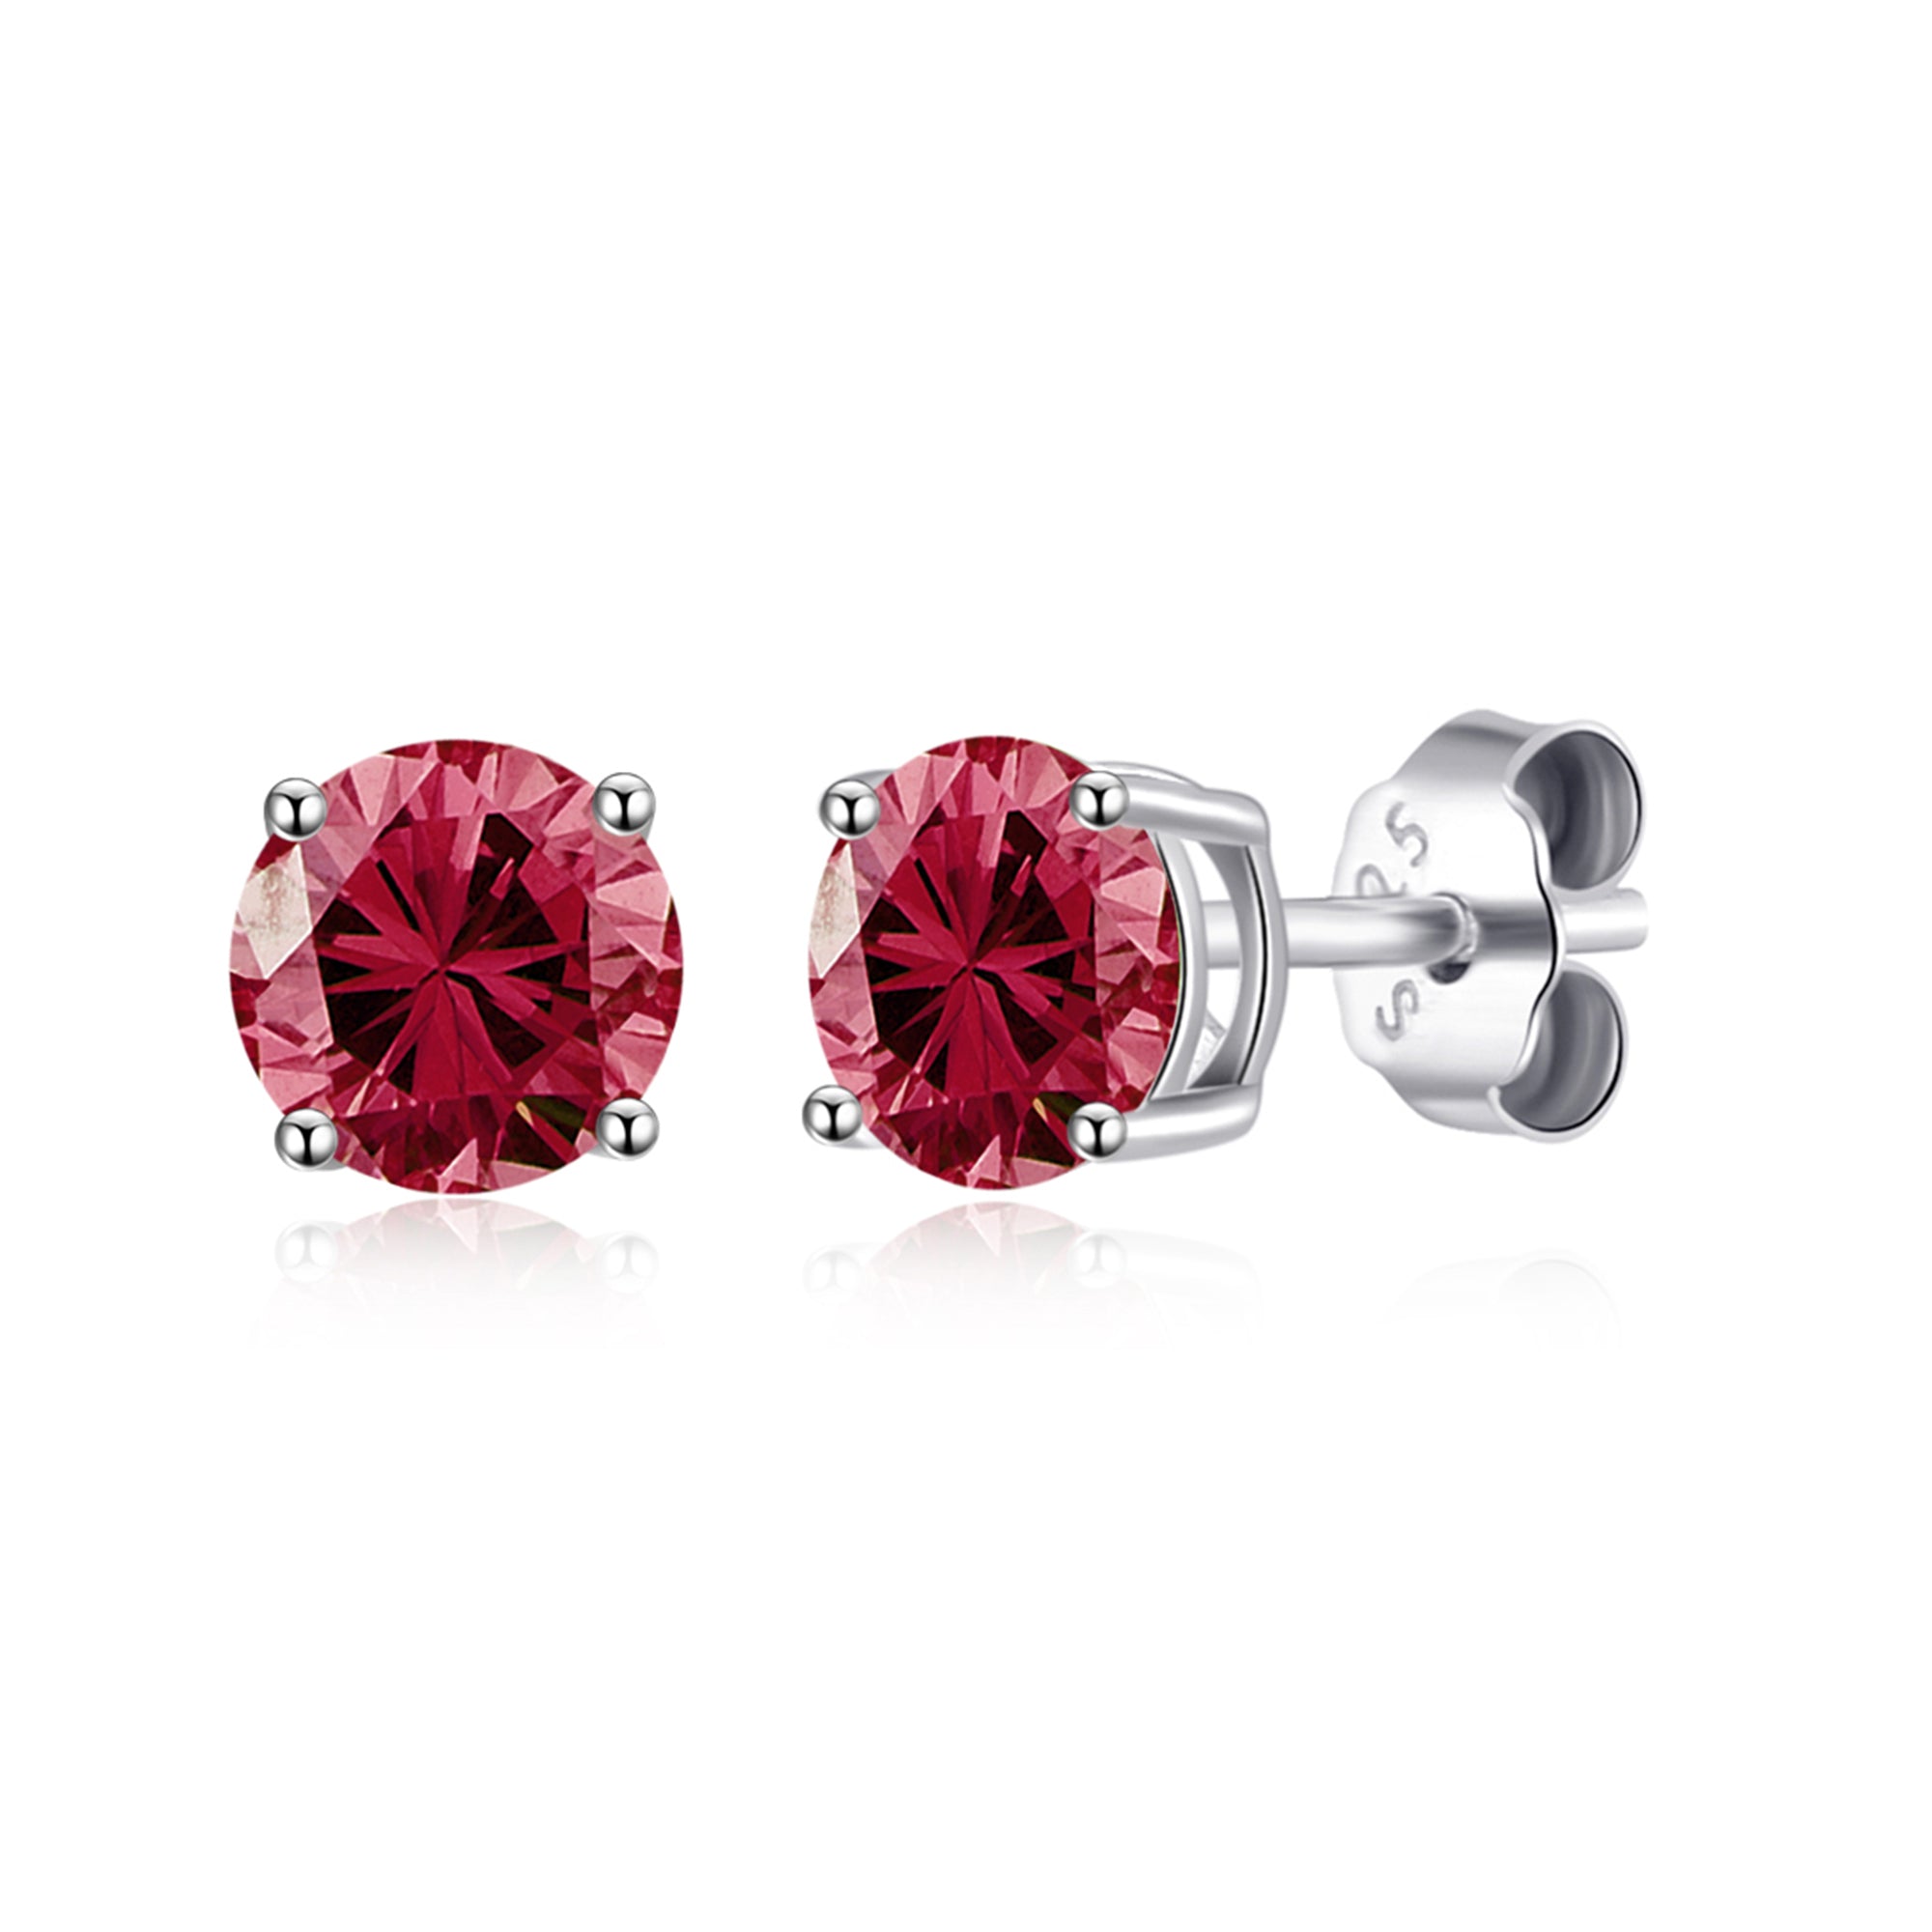 Sterling Silver July (Ruby) Birthstone Earrings Created with Zircondia® Crystals by Philip Jones Jewellery